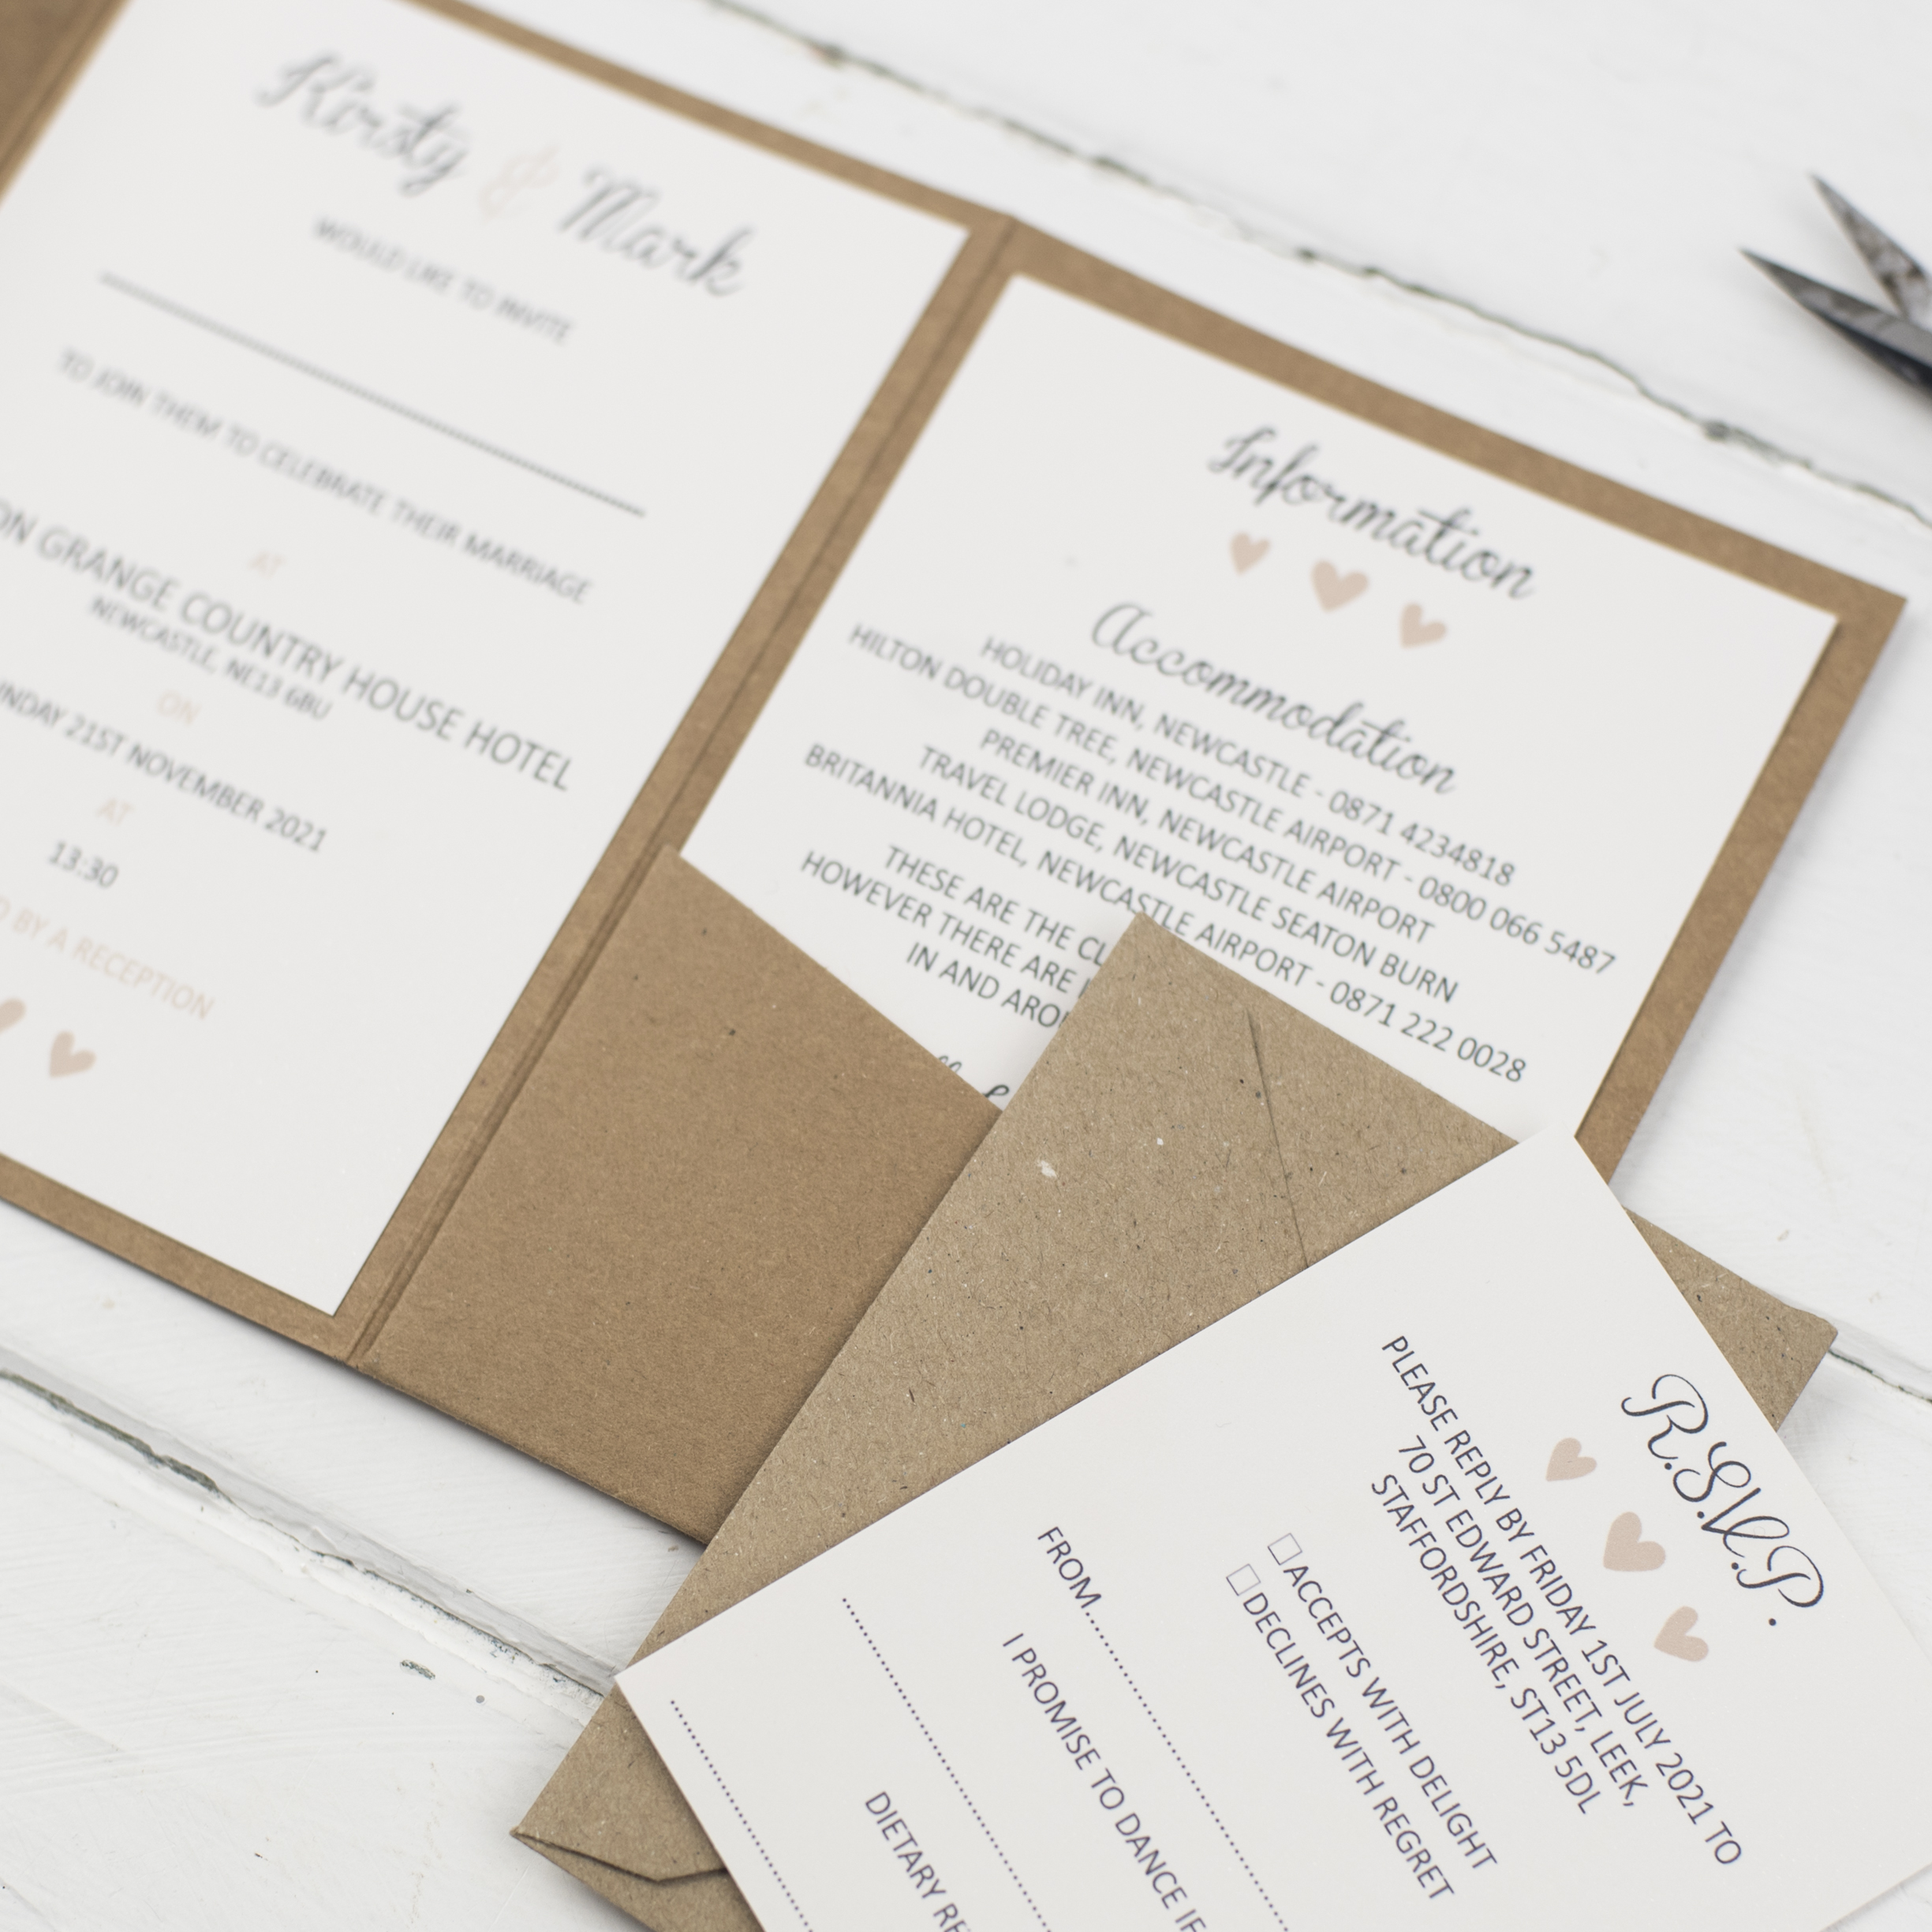 Rural Wedding Invitations and Stationery information inserts inside wedding invitation by Inspired by Lisa